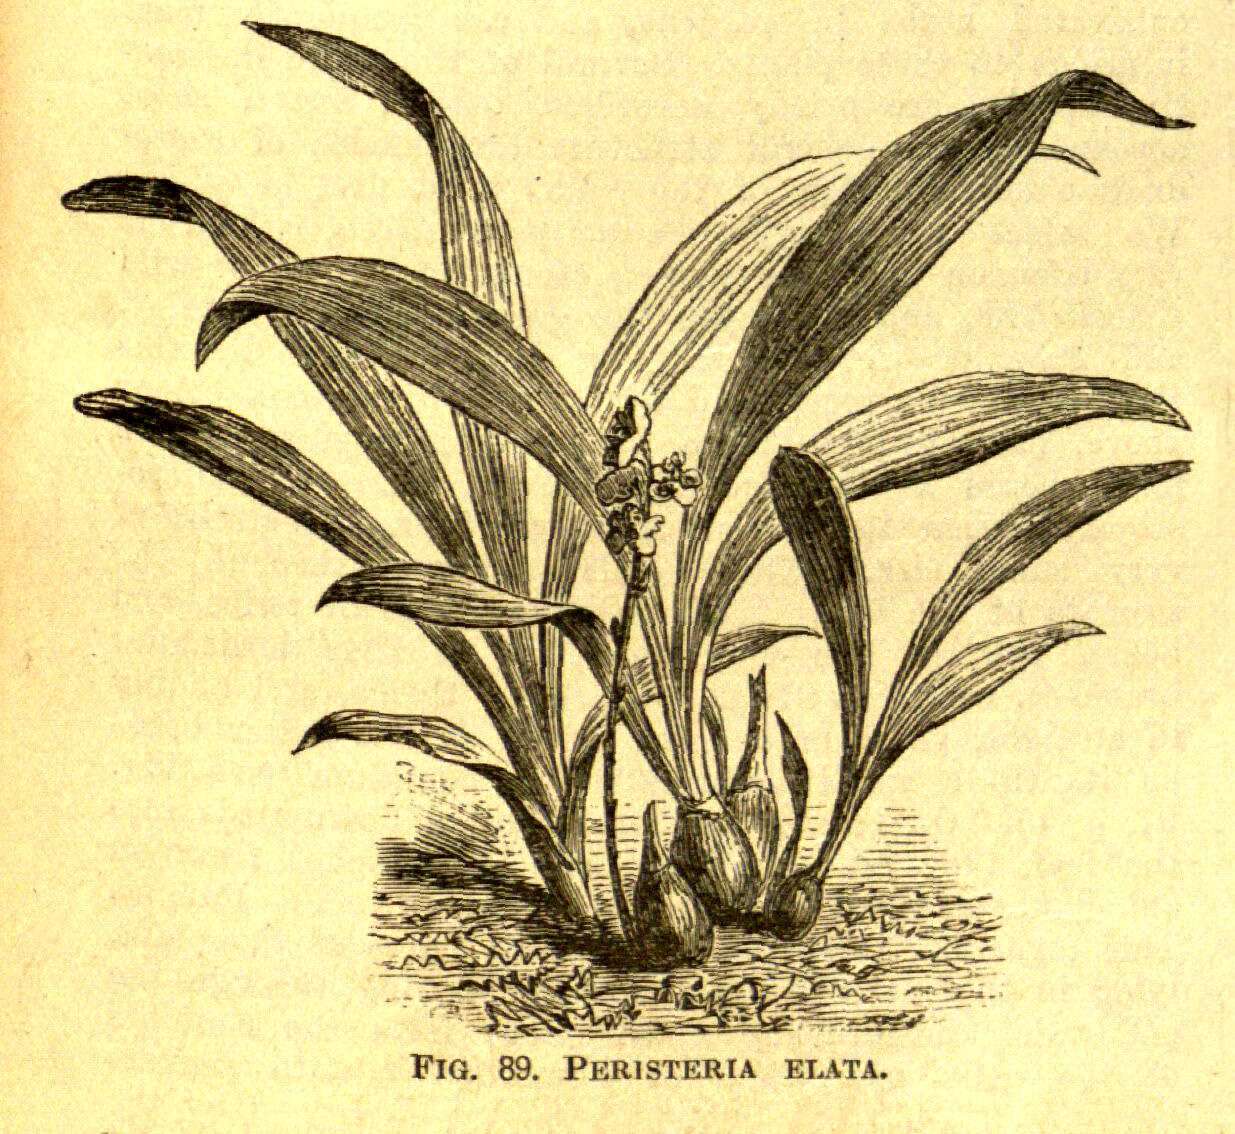 Image of Dove orchid